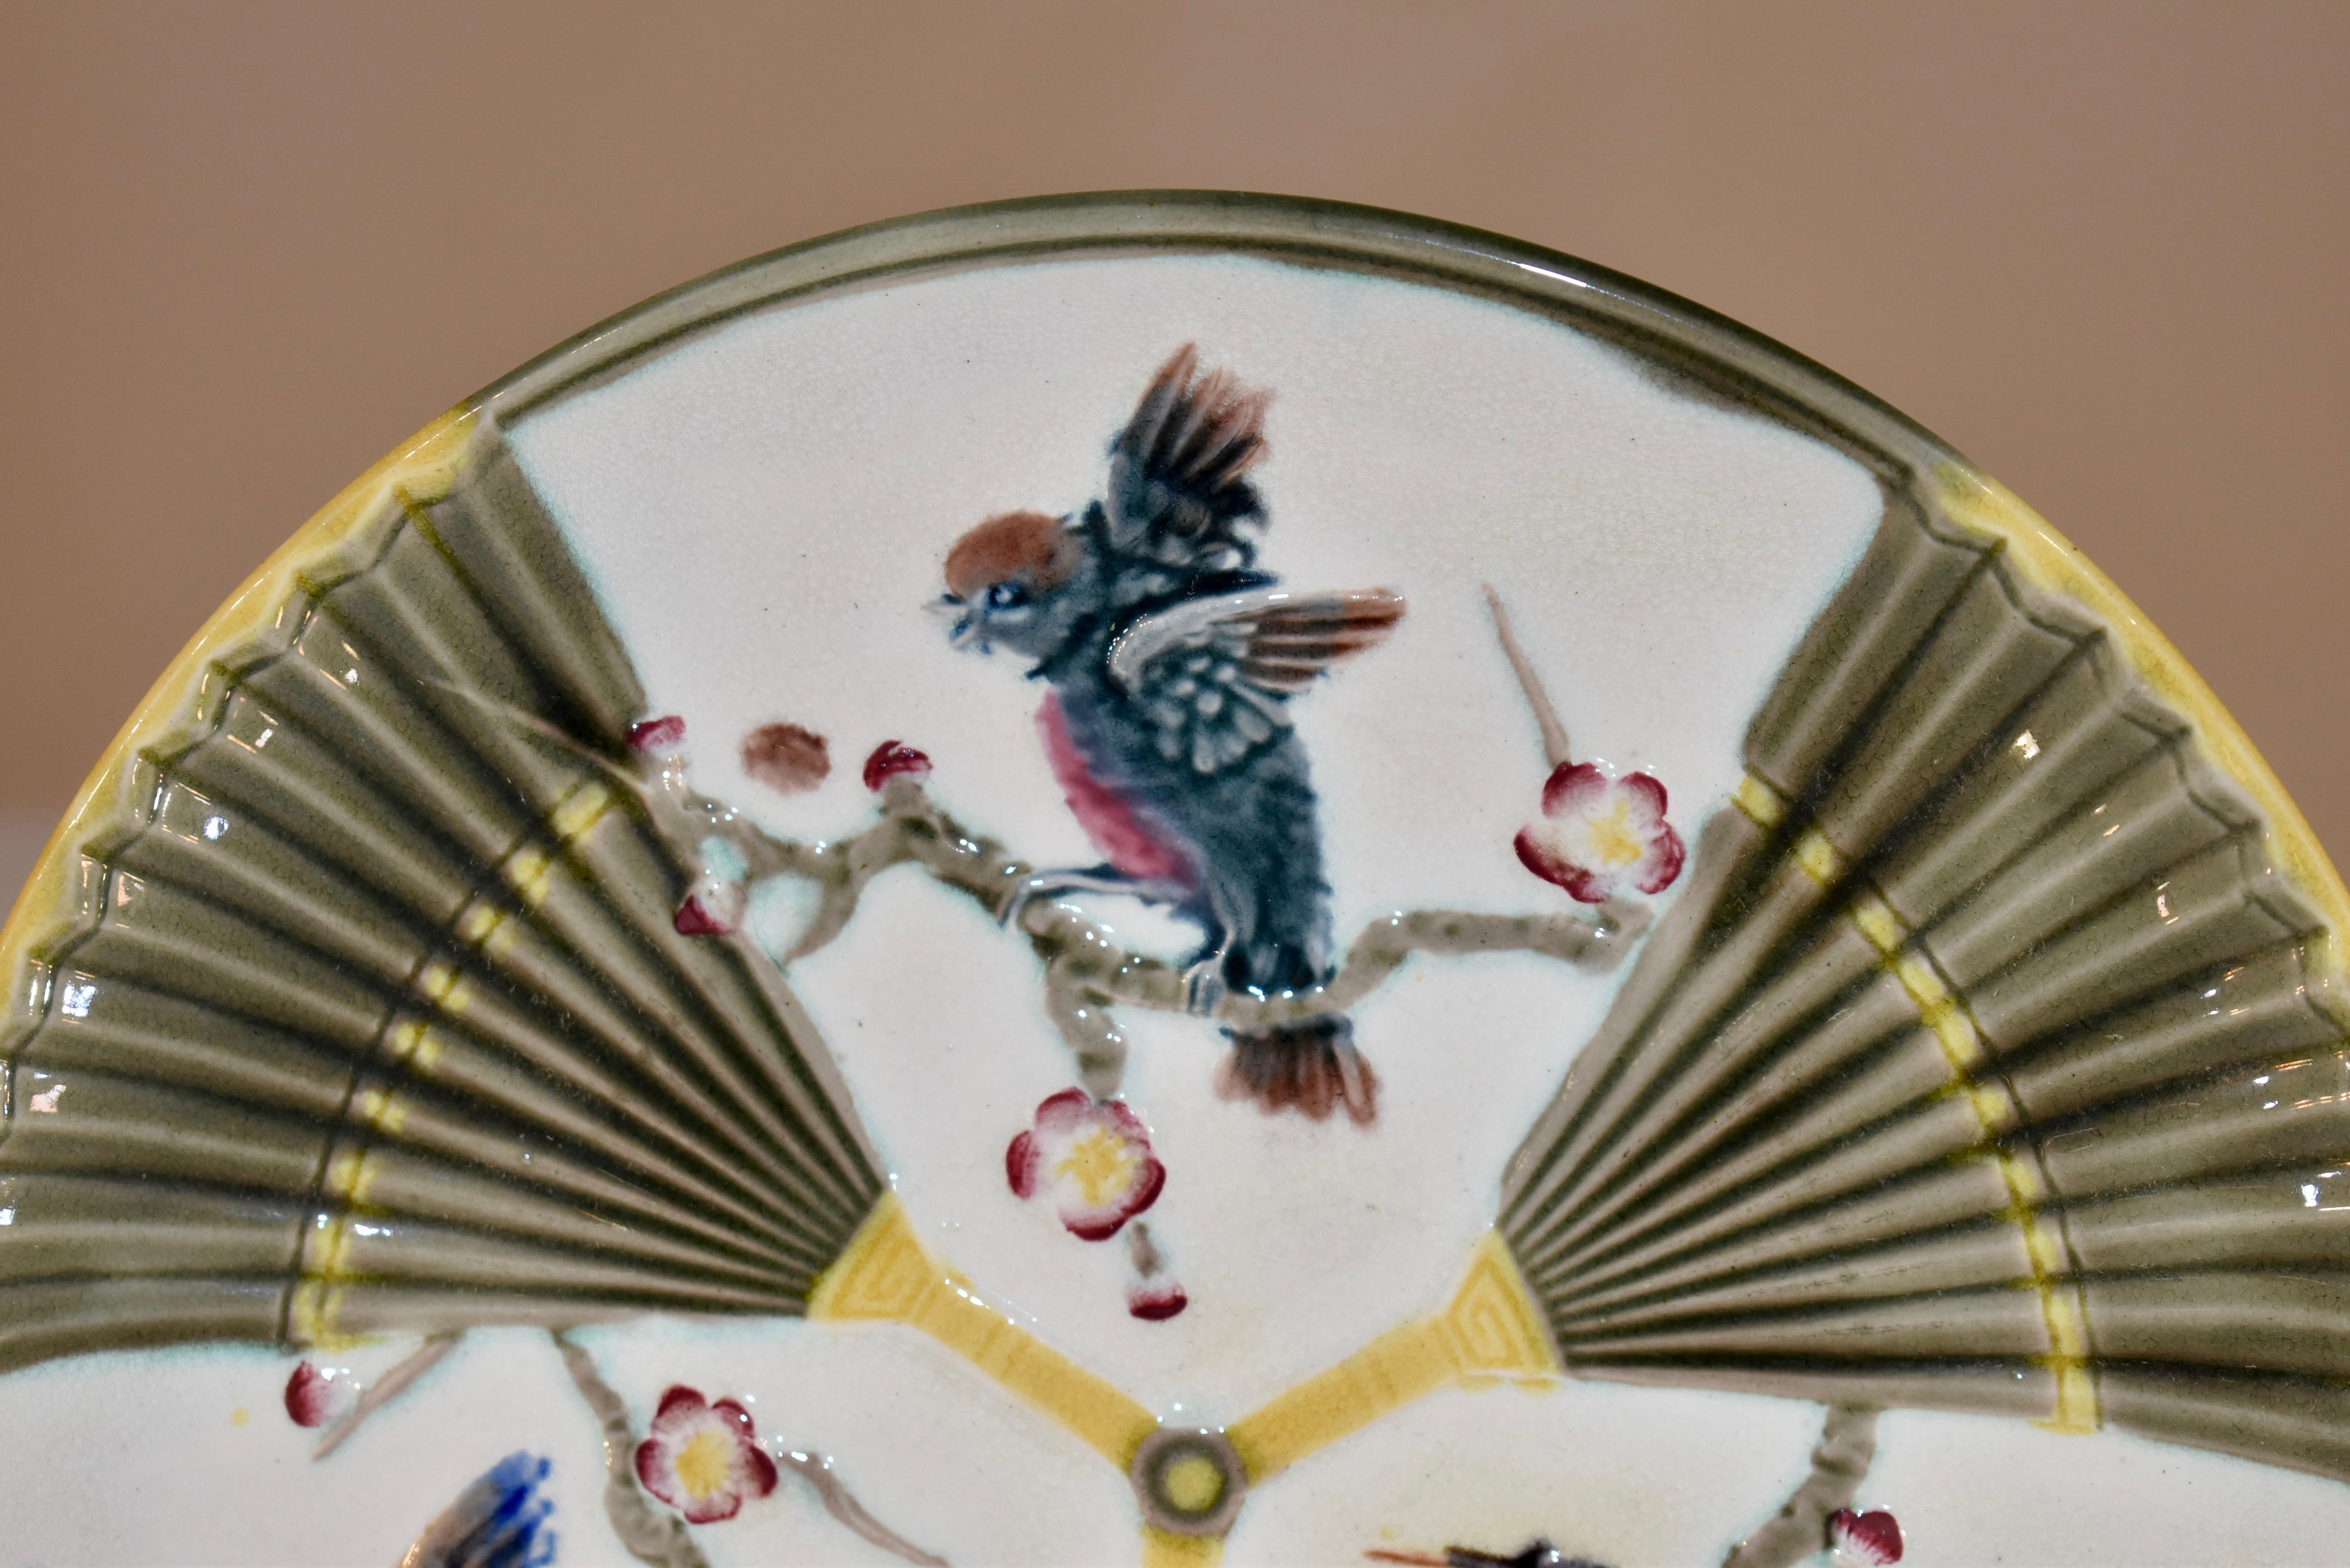 19th century majolica bird and fan pattern plate from England. There is an impressed WEDGWOOD mark on the back of the plate. The colors are vibrant and lovely.